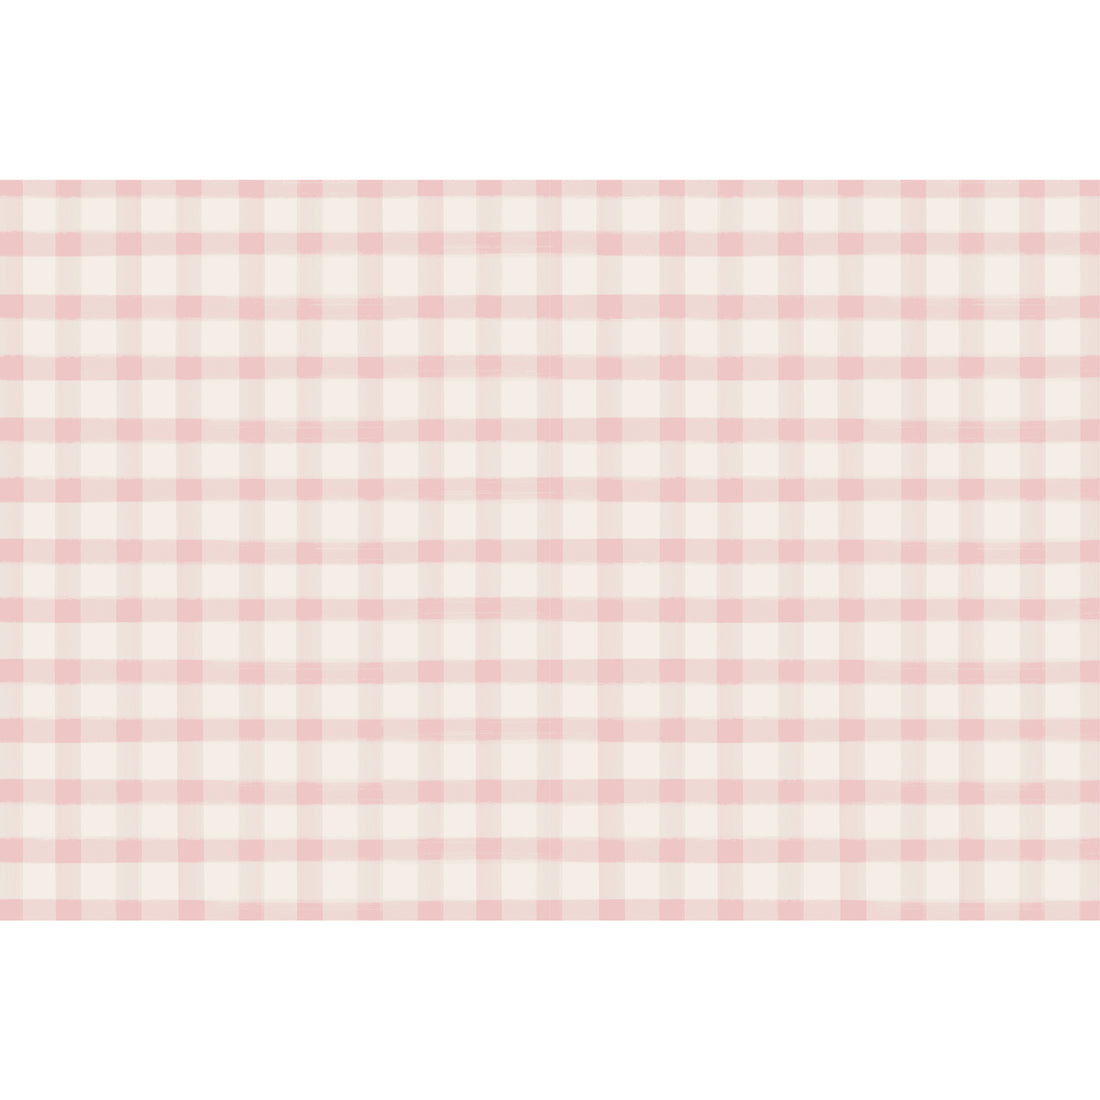 A painted gingham grid check pattern made of light pink lines intersecting at pink squares, on a white background.